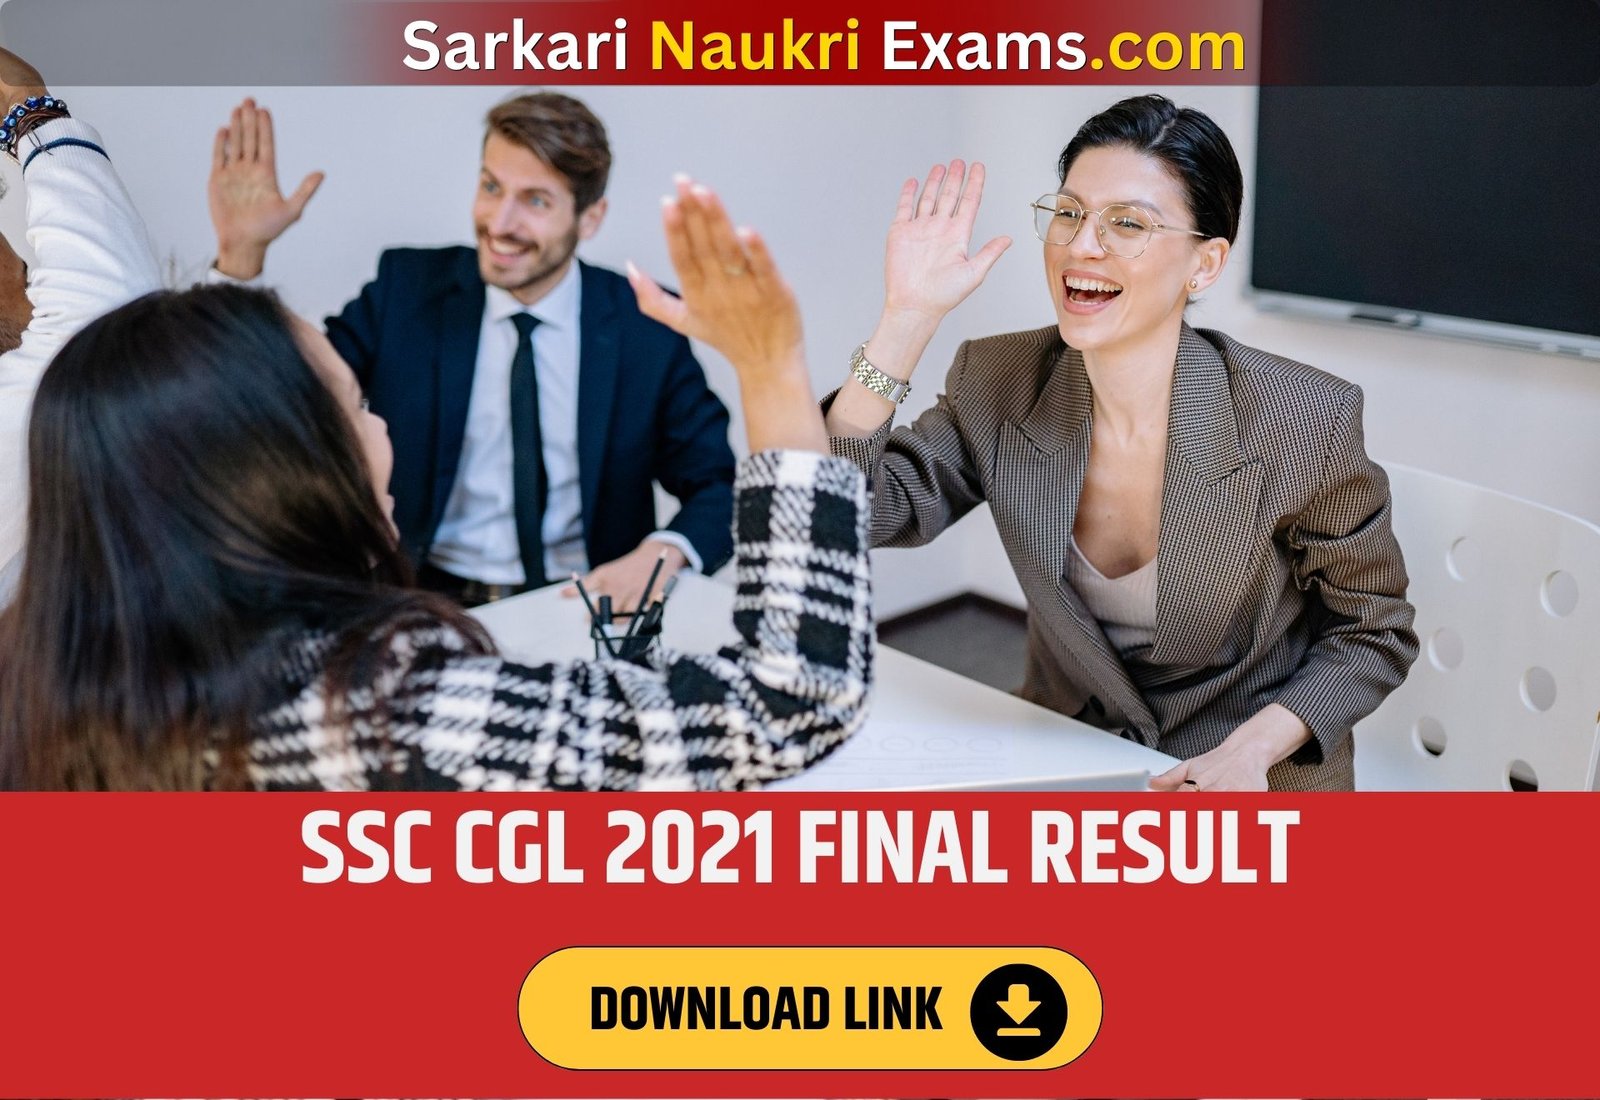 SSC CGL 2021 Final Result(OUT) | Download Link, Cut Off